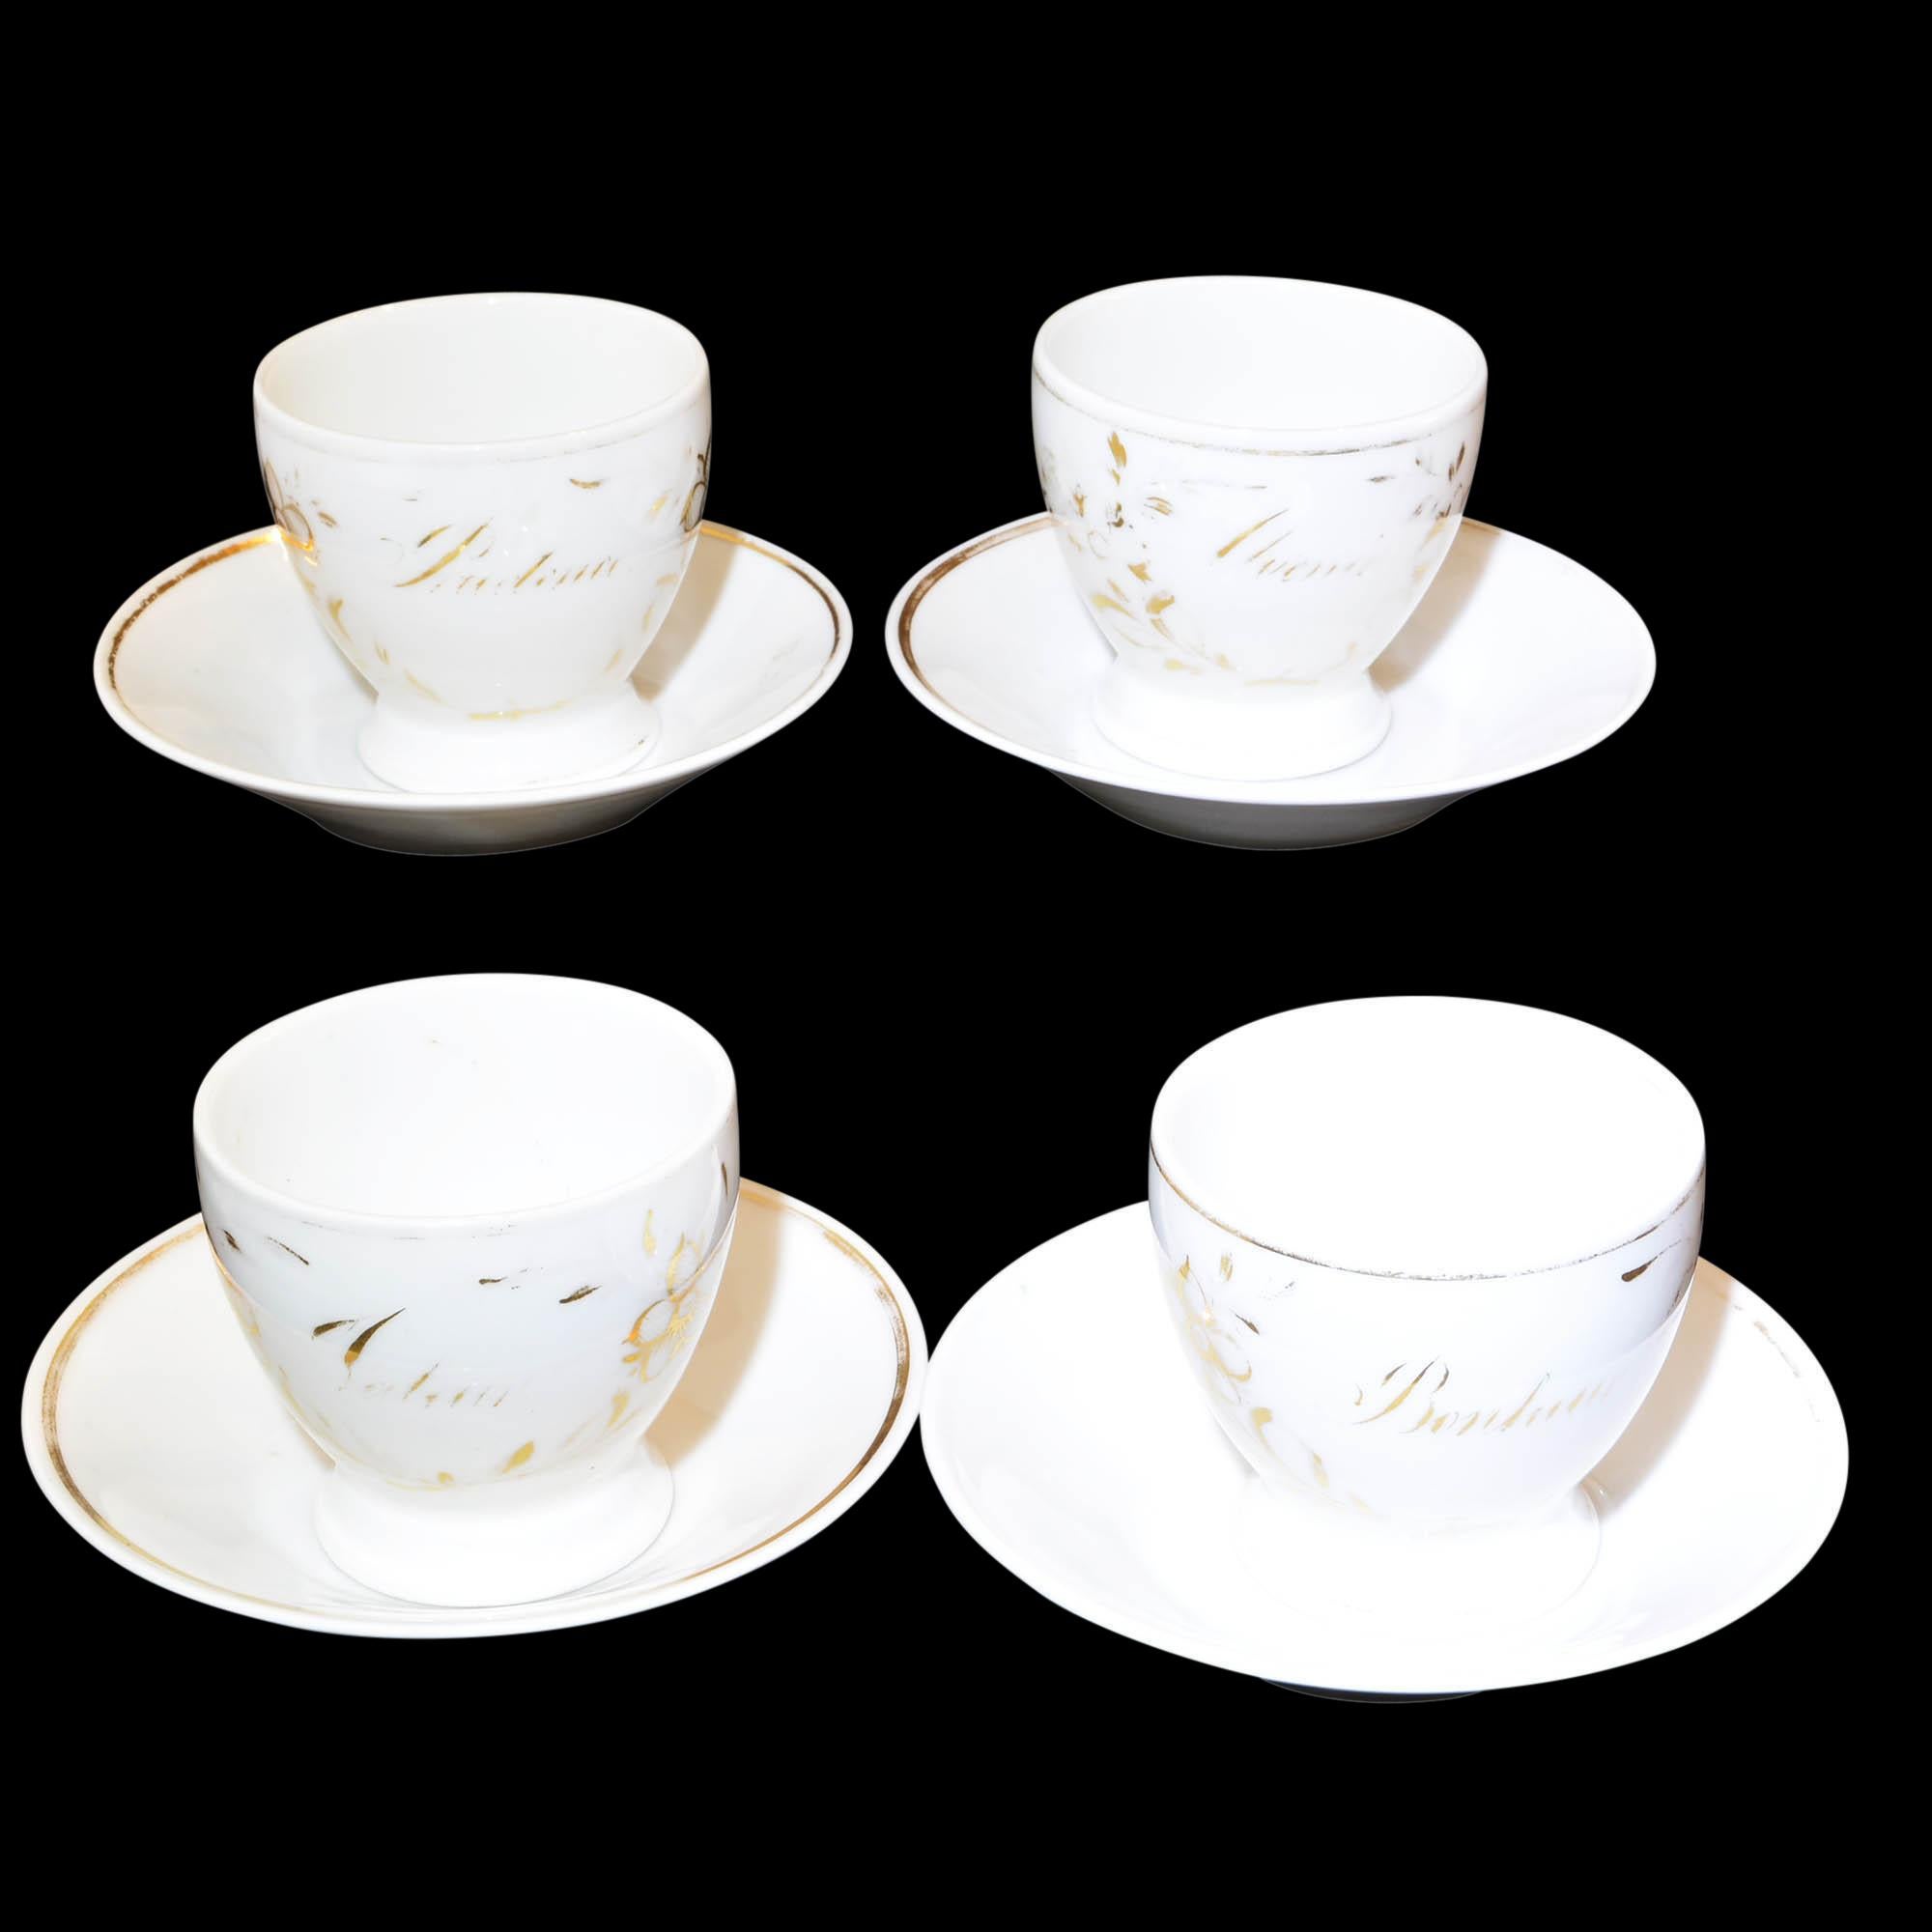 French White Porcelain with Gold Accent Tea Set In Fair Condition For Sale In Pataskala, OH